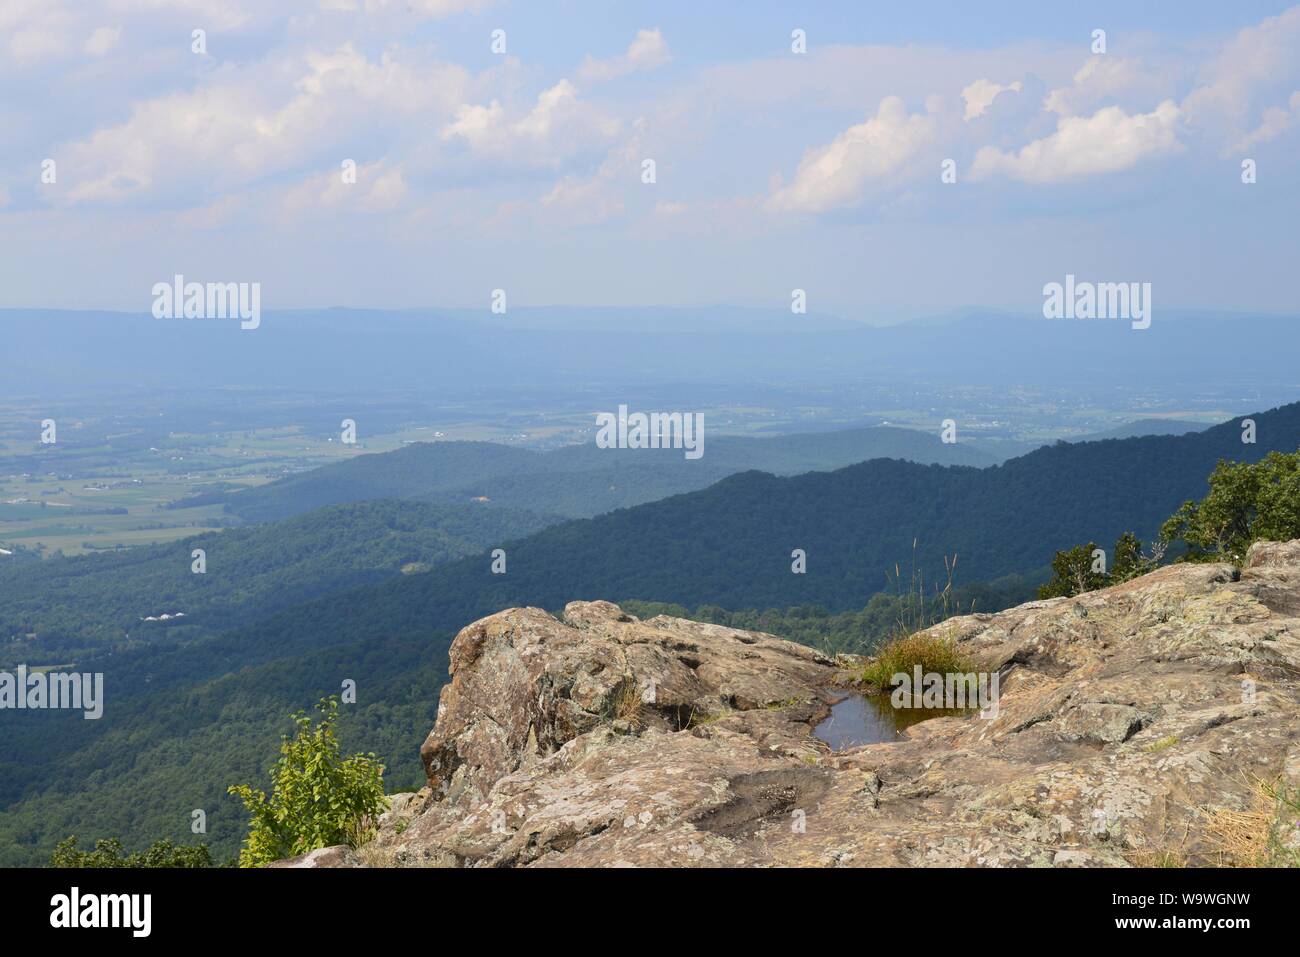 View of the Shenandoah Valley from Shenandoah National Park in Virginia, USA Stock Photo